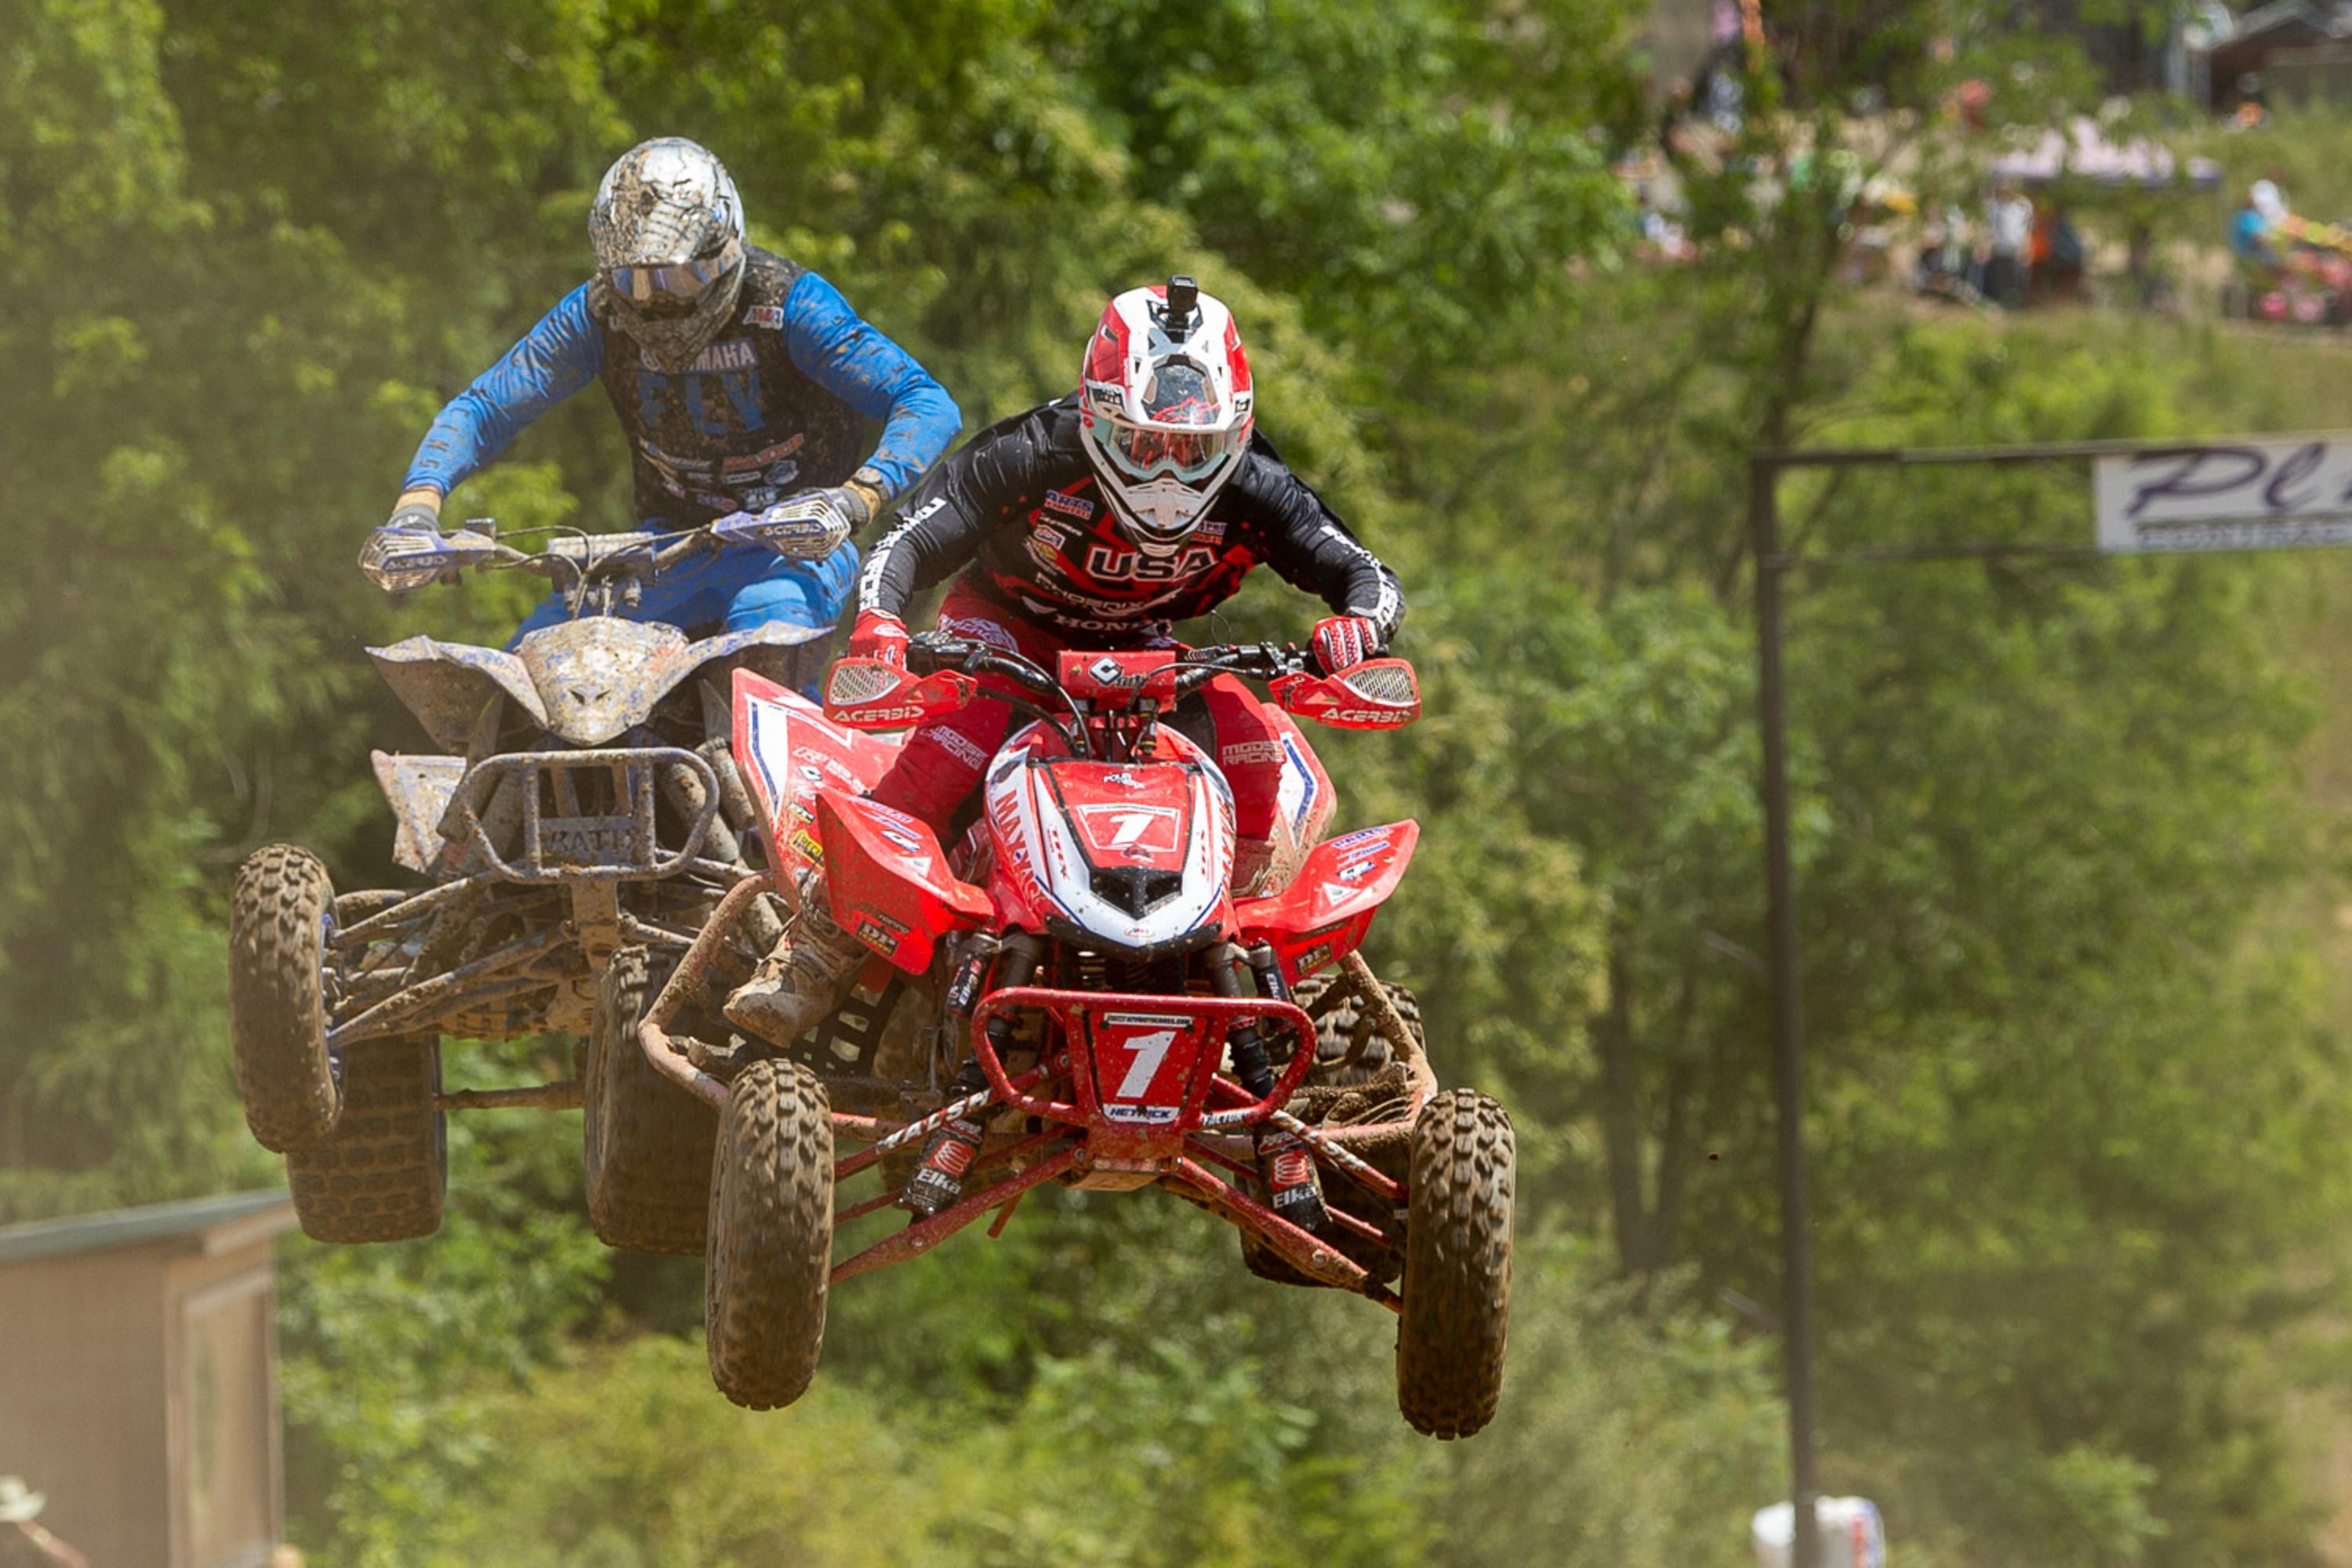 RLT Competition Bulletin 2020-14 Update to Pro Motocross, Loretta Lynn, GNCC and ATVMX Schedules